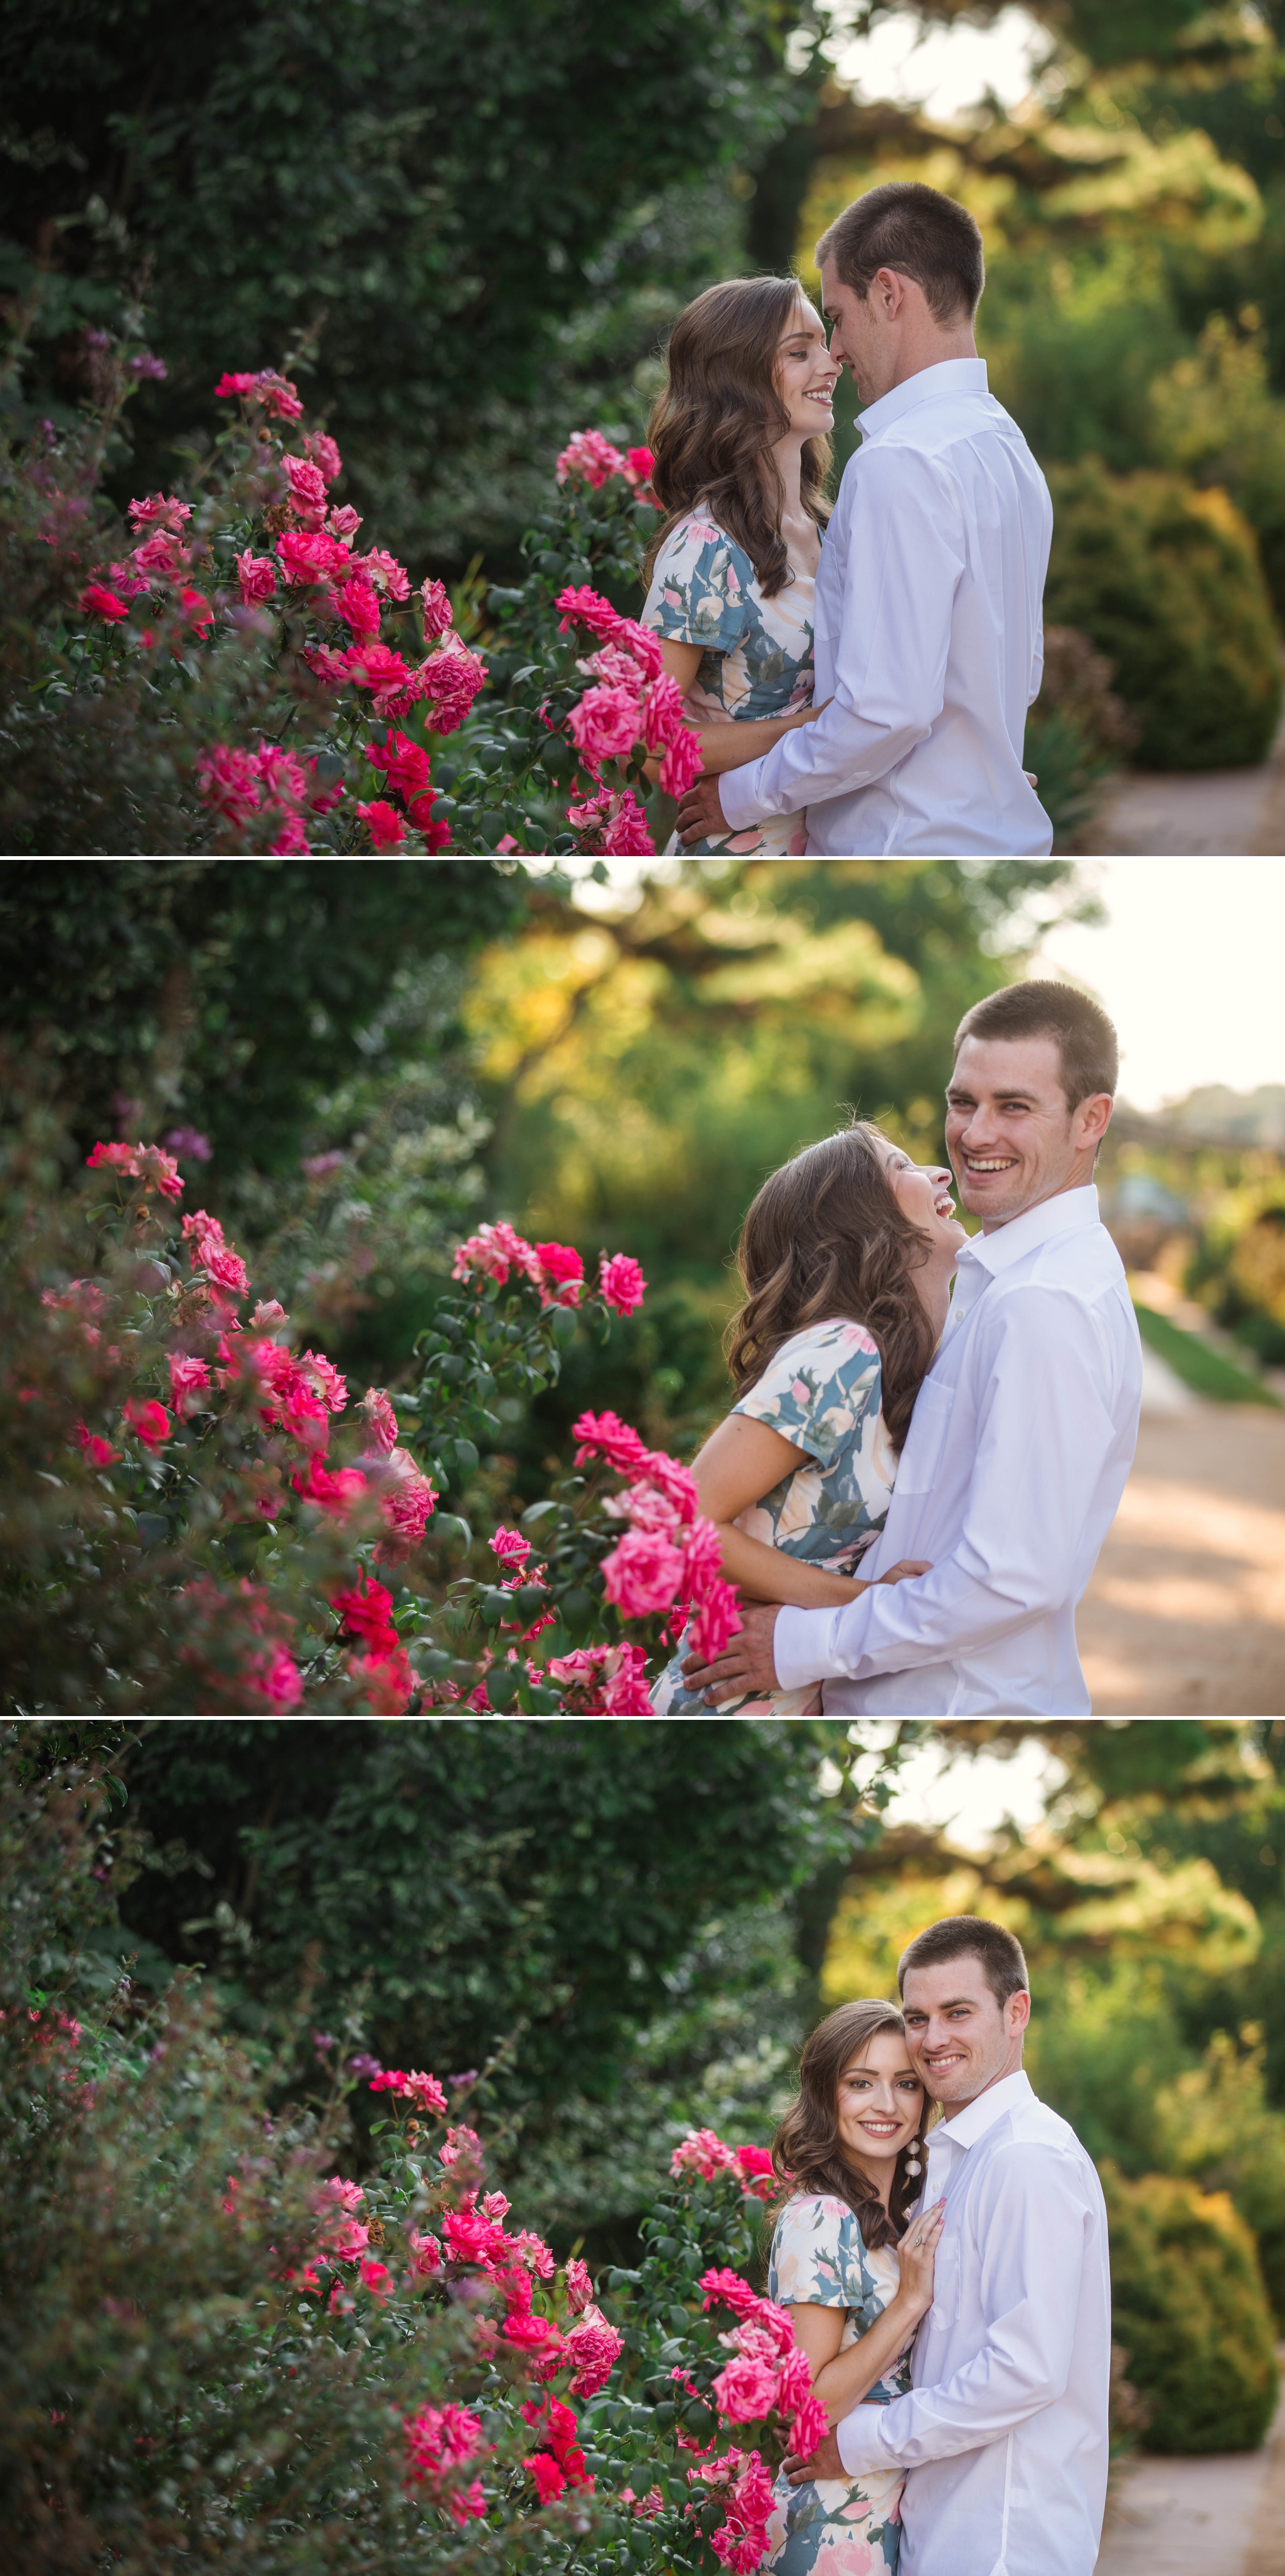 Paige + Tyler - Engagement Photography Session at the JC Raulston Arboretum - Raleigh Wedding Photographer 1.jpg